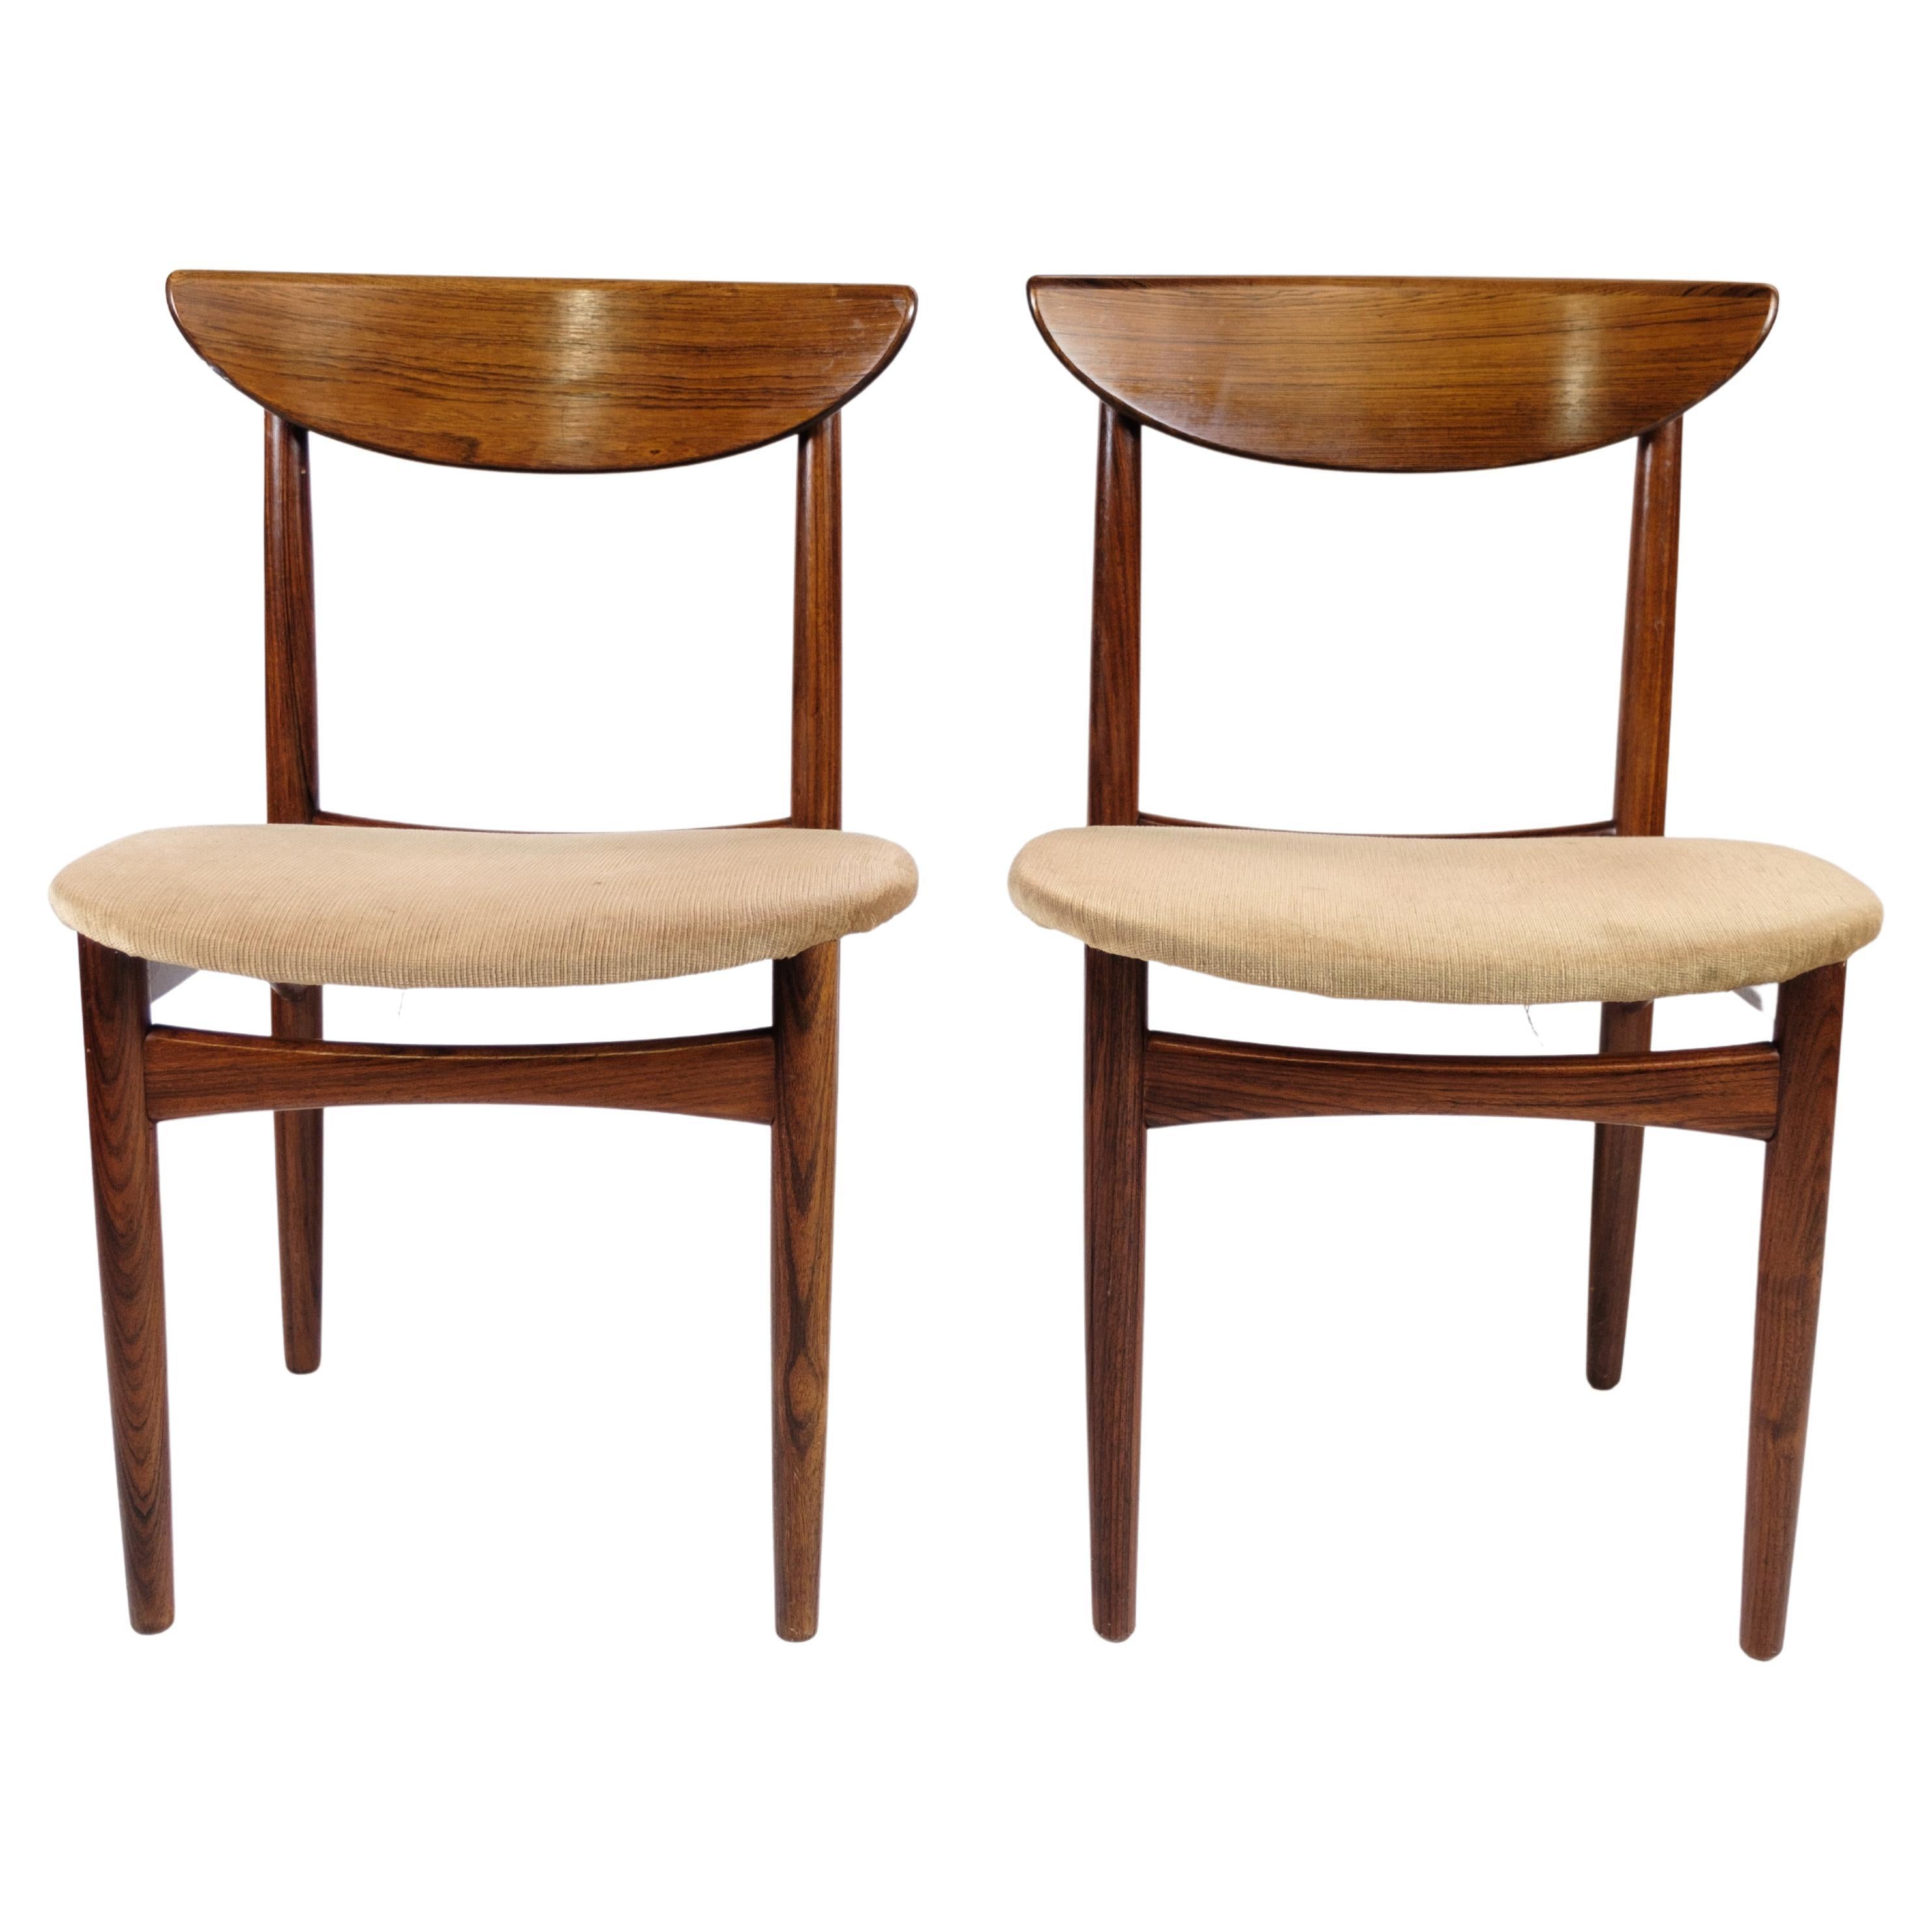 Set of 2 Chairs Made In Rosewood By Peter Hvidt From 1960s